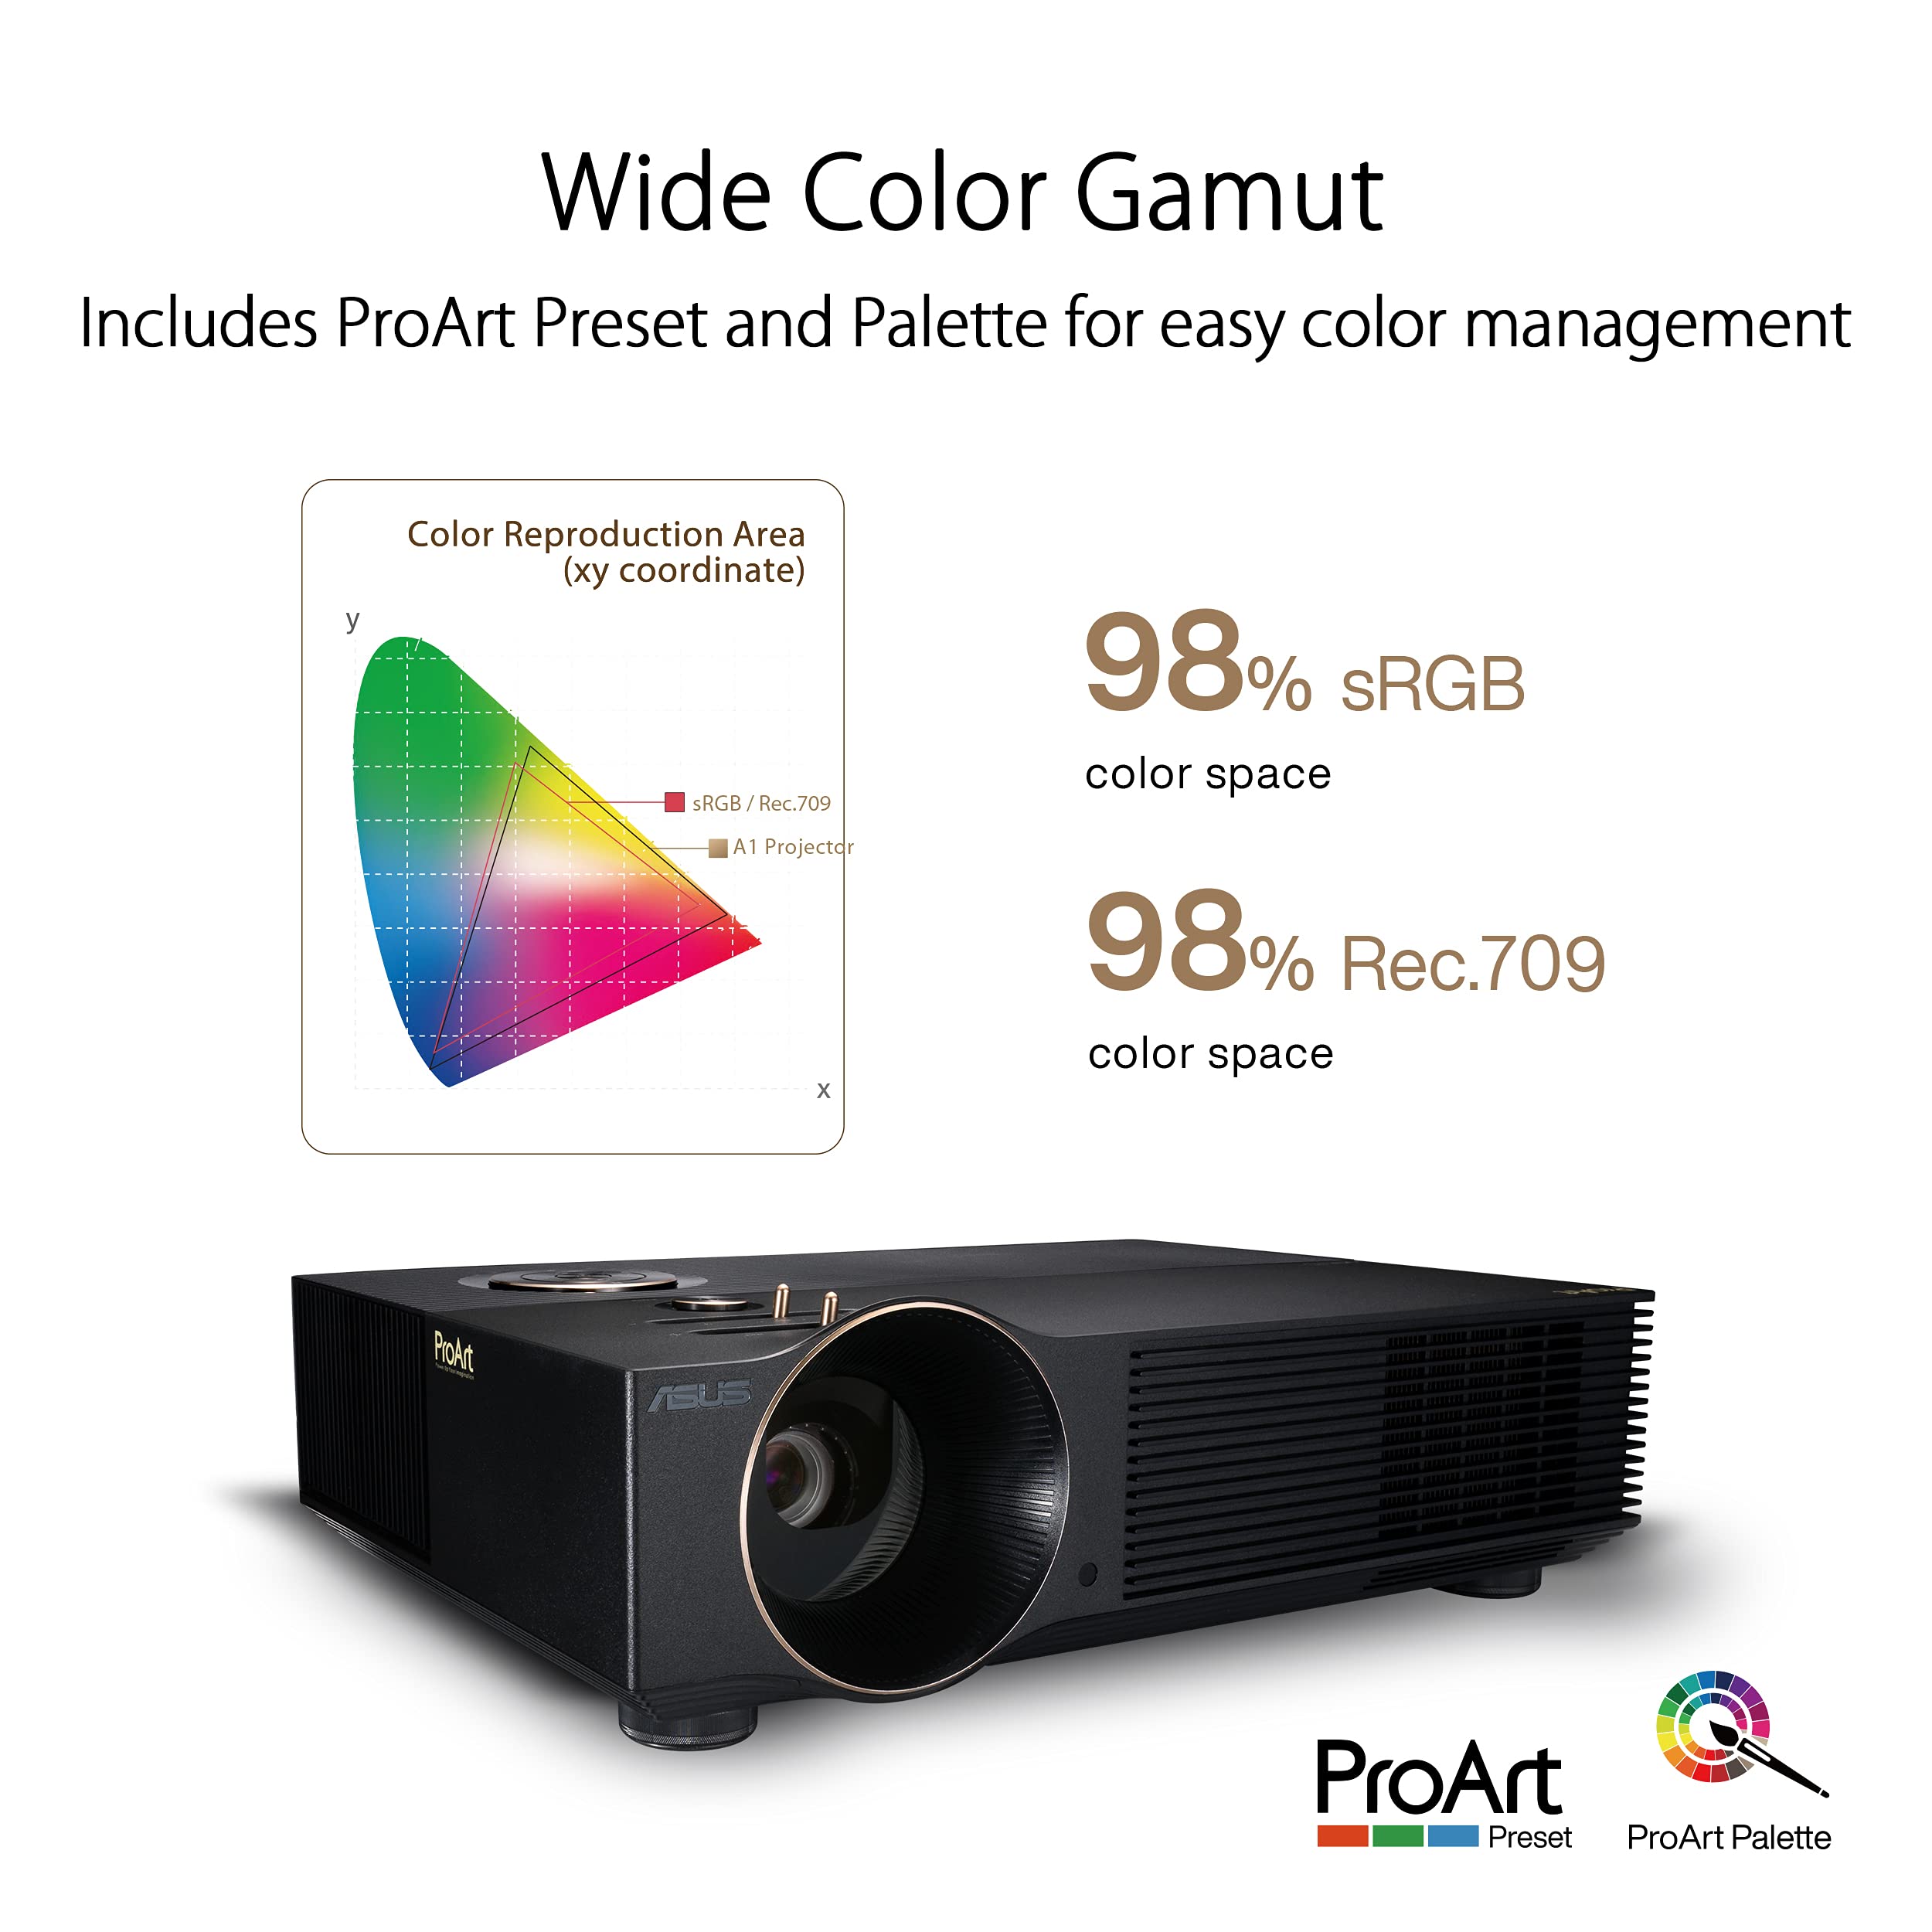 ASUS ProArt A1 LED Professional Projector - Full HD, 3000 Lumens, ∆E  2, 98% sRGB and Rec. 709, World’s First Calman Verified projector, 2D keystone correction, 1.2X zoom ratio, Wireless mirroring